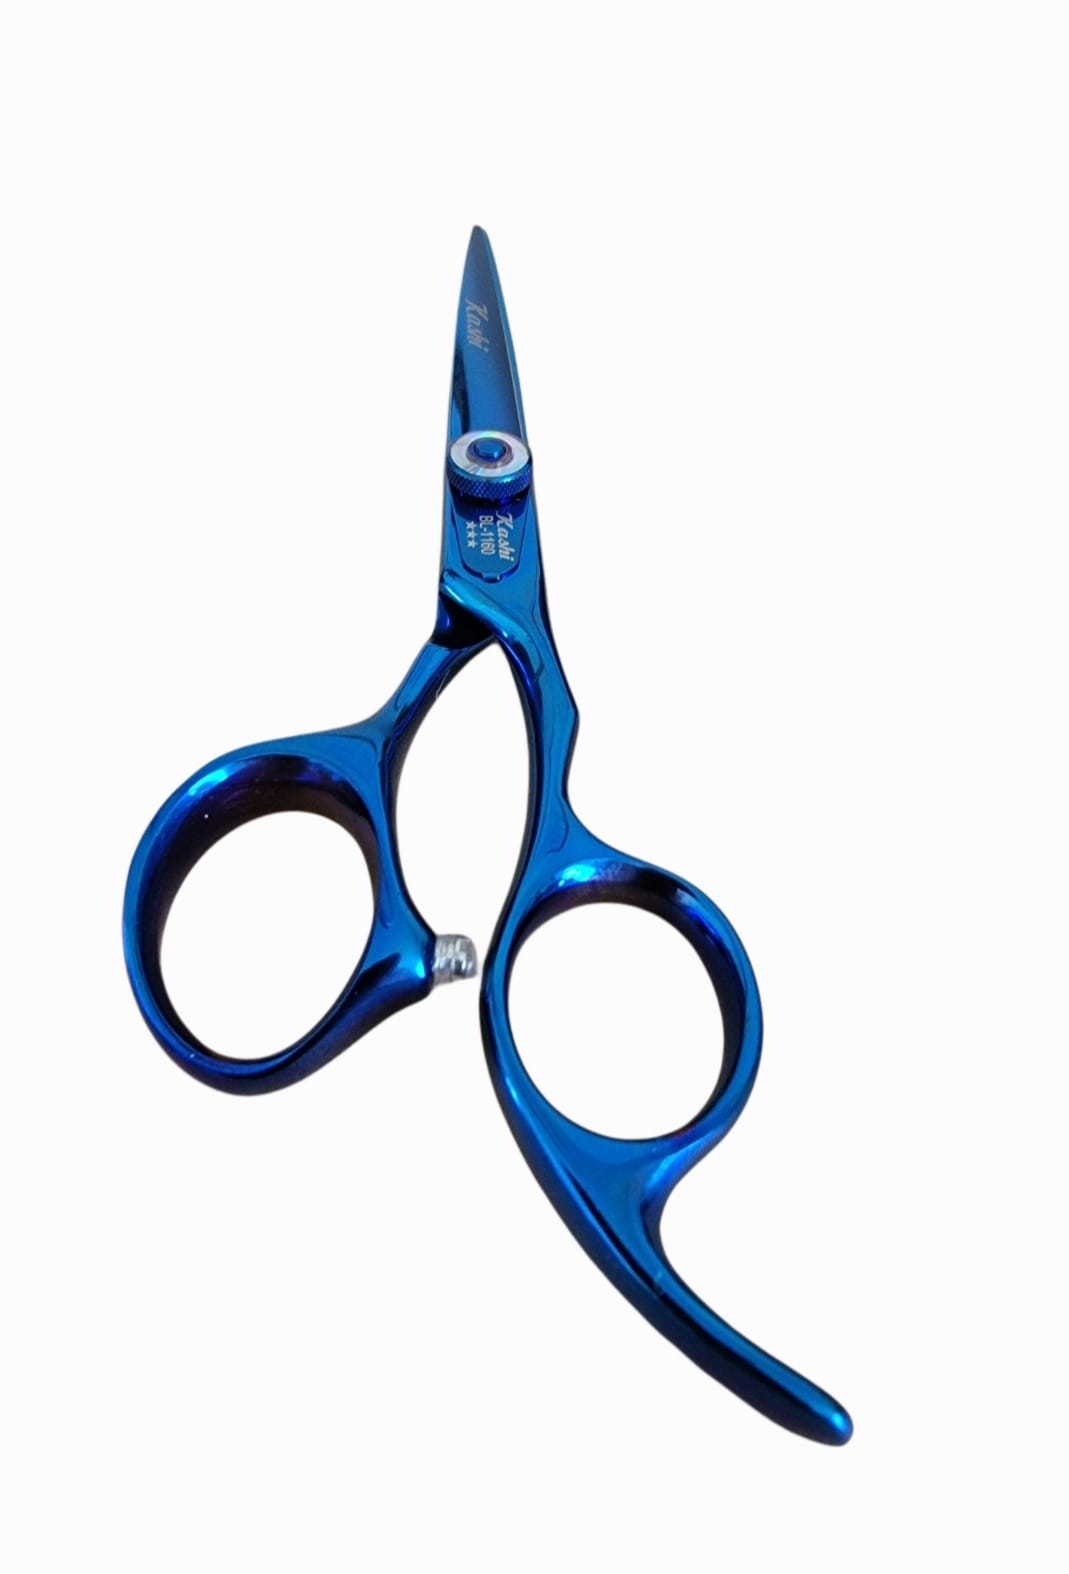 Kashi BL-1160 Professional Hair Cutting Shears  Japanese  Steel,  6 inch Blue Color